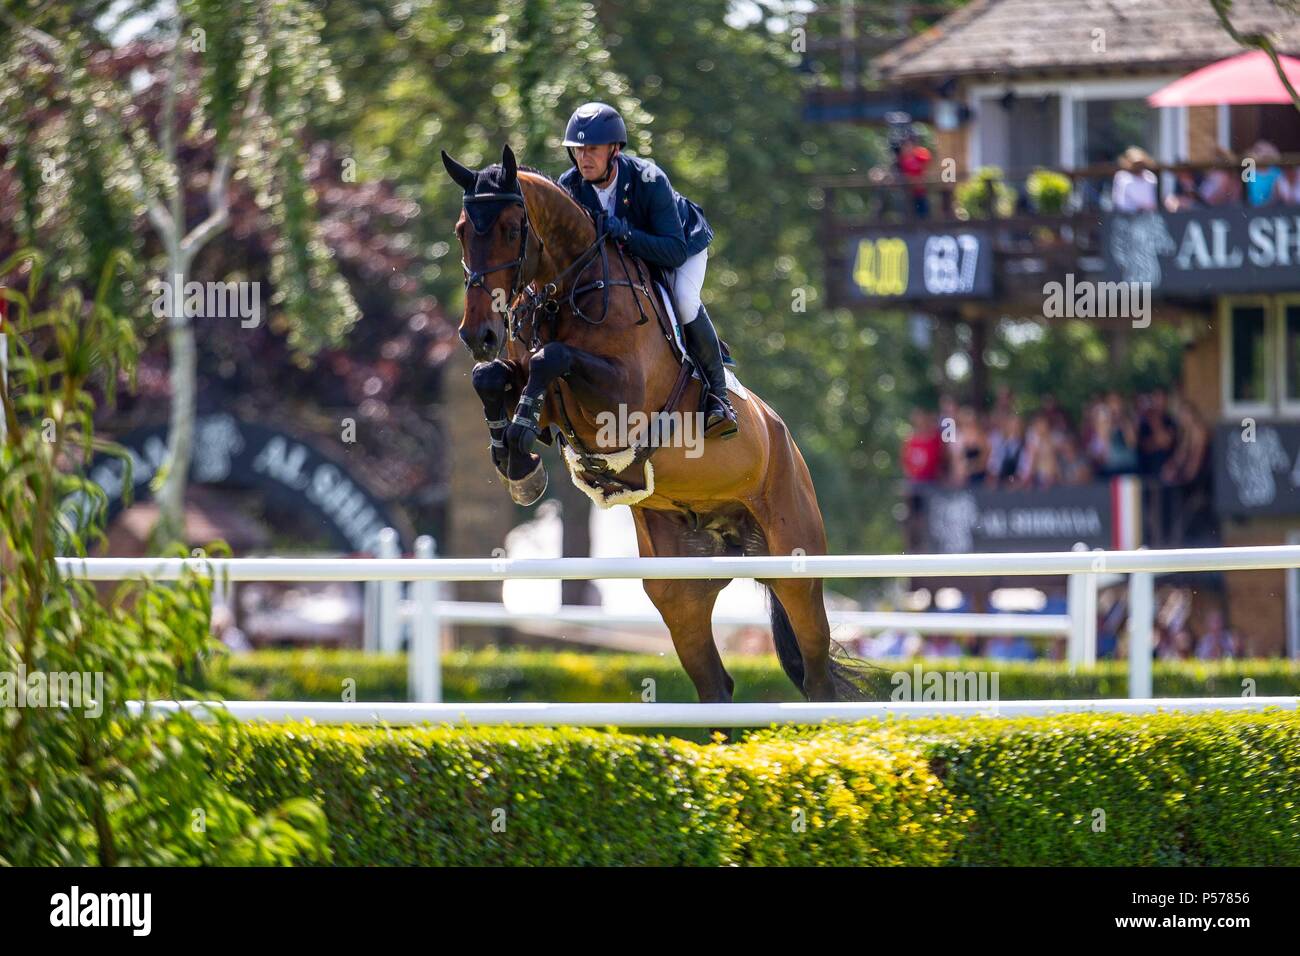 West Sussex, UK. 24th Jun, 2018. Anthony Condon riding Cavaklier Rustica. IRL.The Al Shira'aa Derby. The Al Shira'aa Hickstead Derby Meeting. Showjumping. The All England Jumping Course. Hickstead. West Sussex. UK. Day 5. 24/06/2018. Credit: Sport In Pictures/Alamy Live News Stock Photo